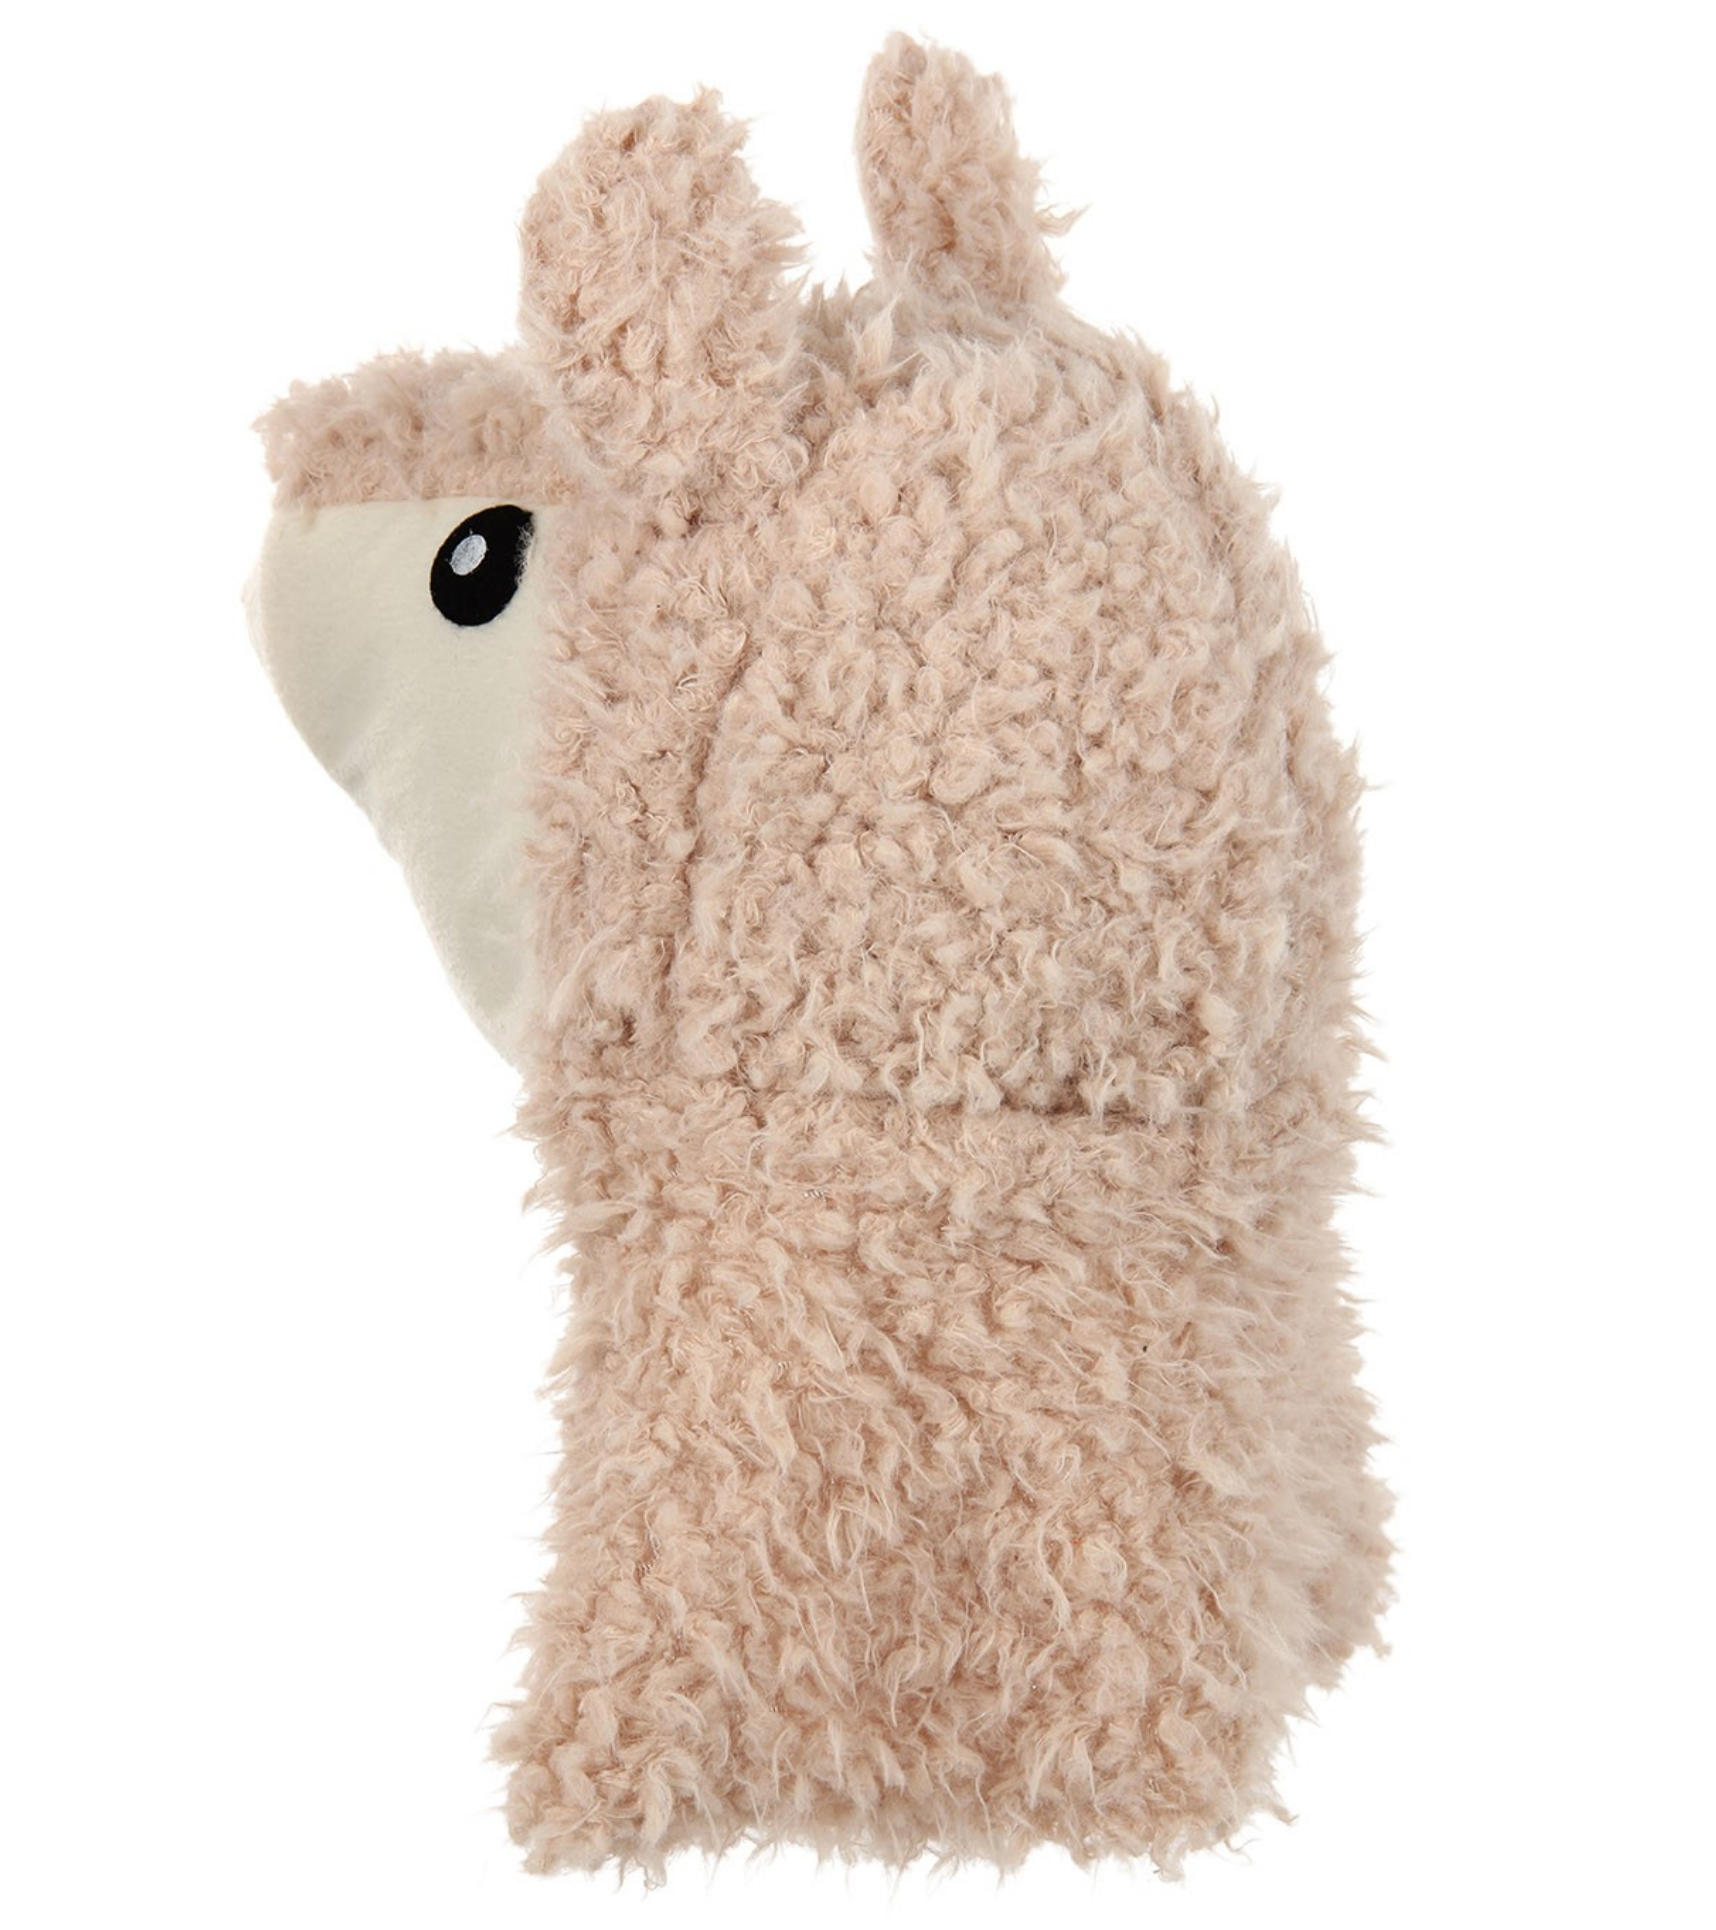 Spitting Llama Sprazy Toy Hat - Plush fits most kids and adults